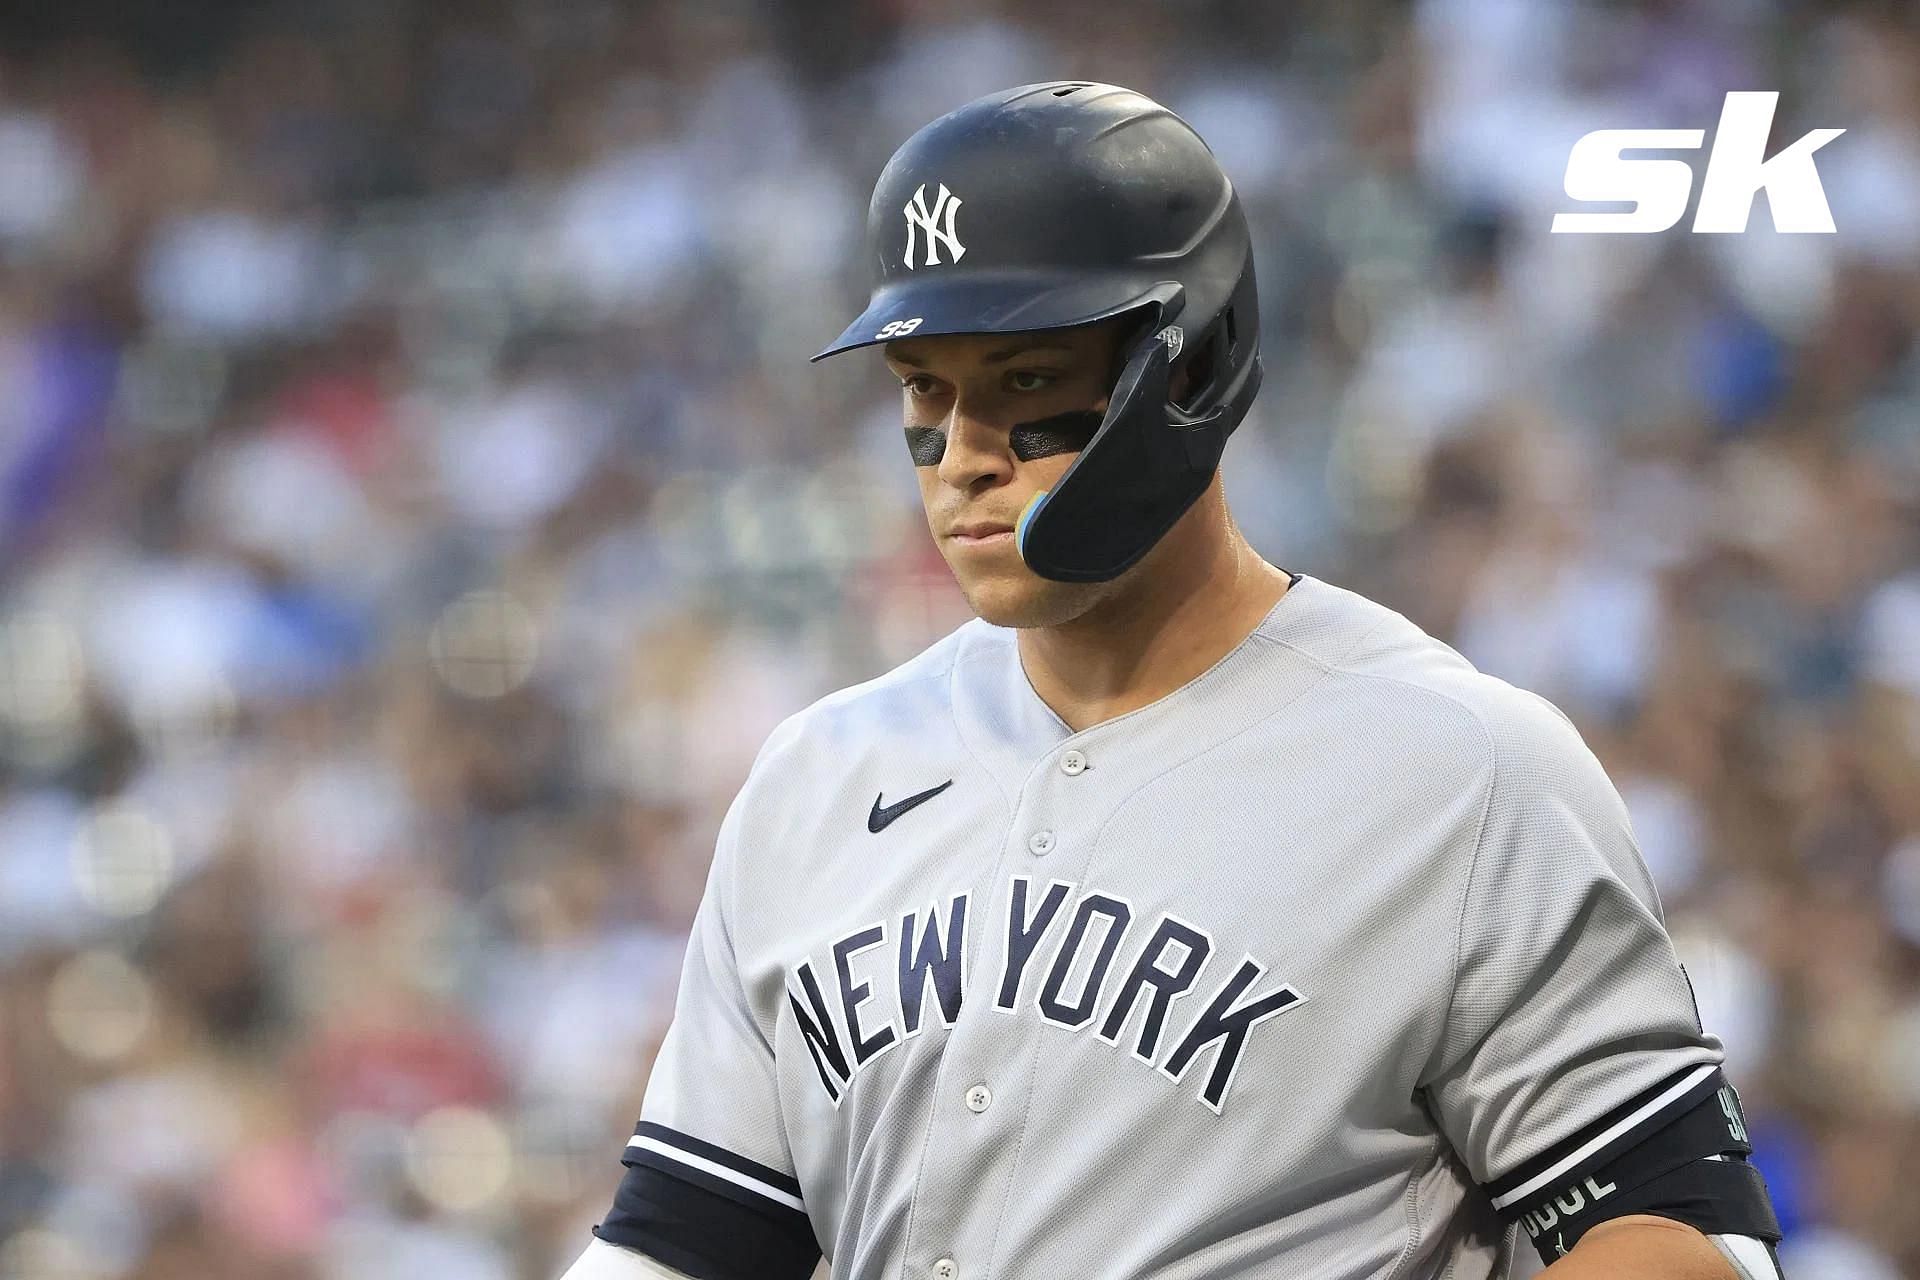 Staying healthy through the course of the season has been a challenge for Aaron Judge